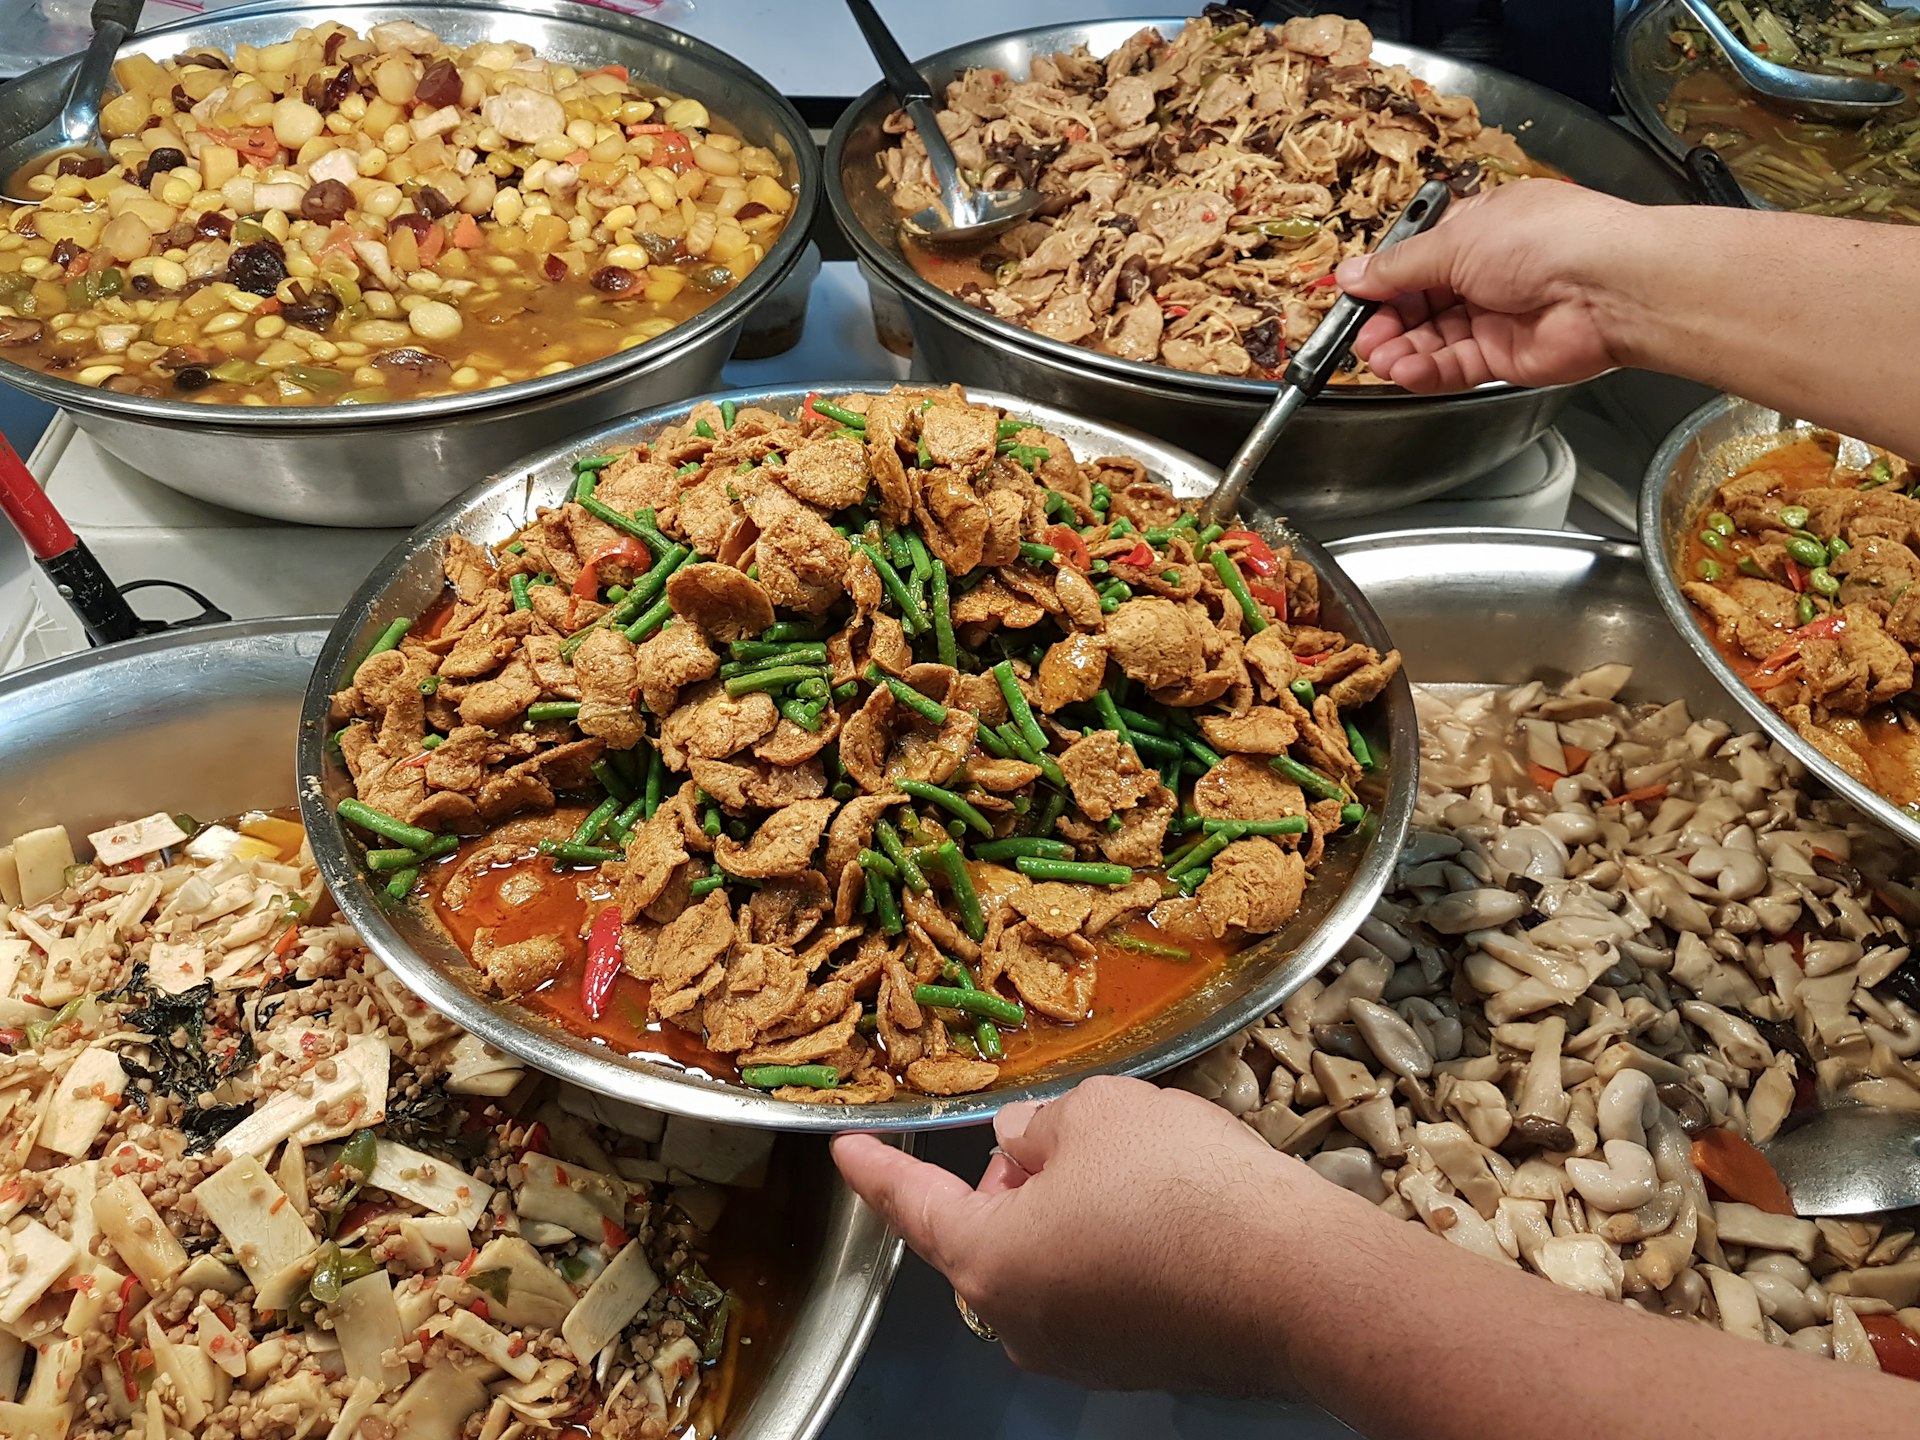 A variety of Thai vegetarian curries and Thai food dishes being served in a market for the annual Thai Vegetarian Festival